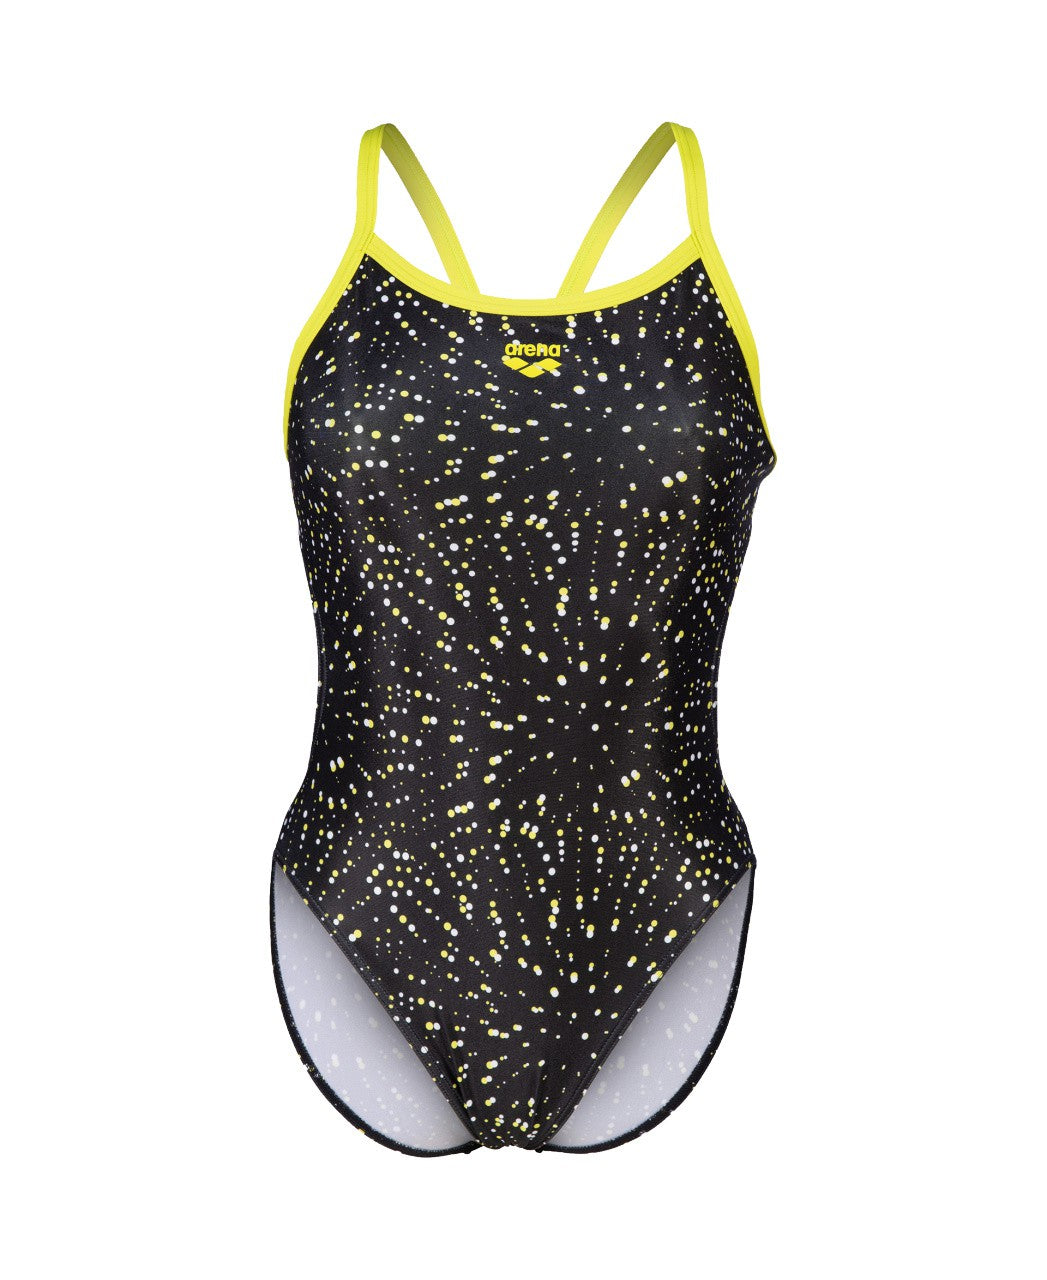 W Fireworks Swimsuit Challenge Back softgreen-multi